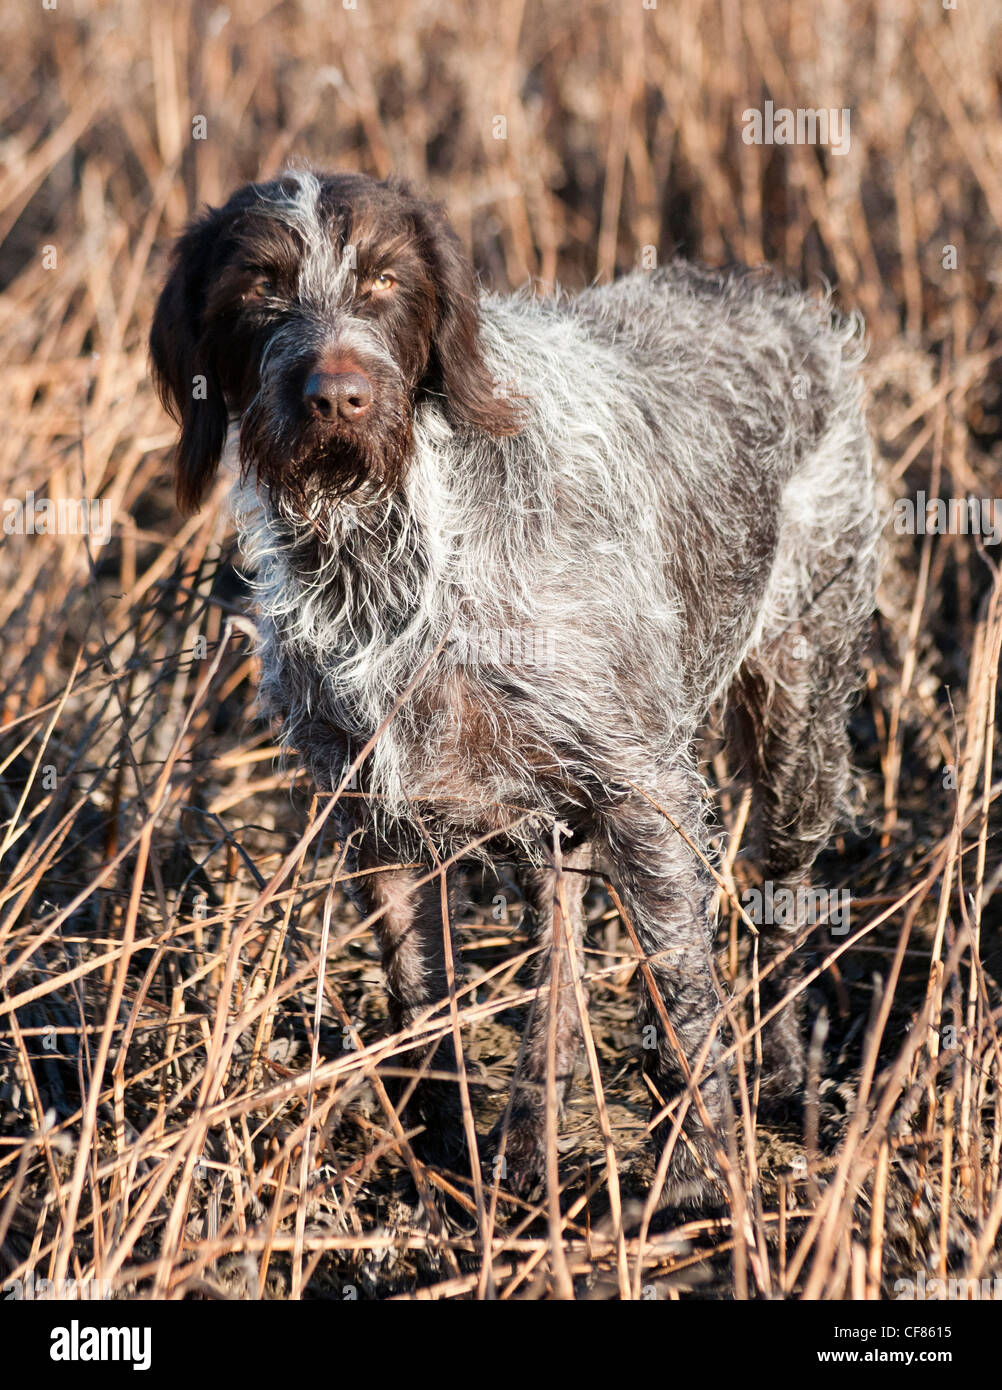 A German Wired Haired Pointer dog stood in a field Stock Photo